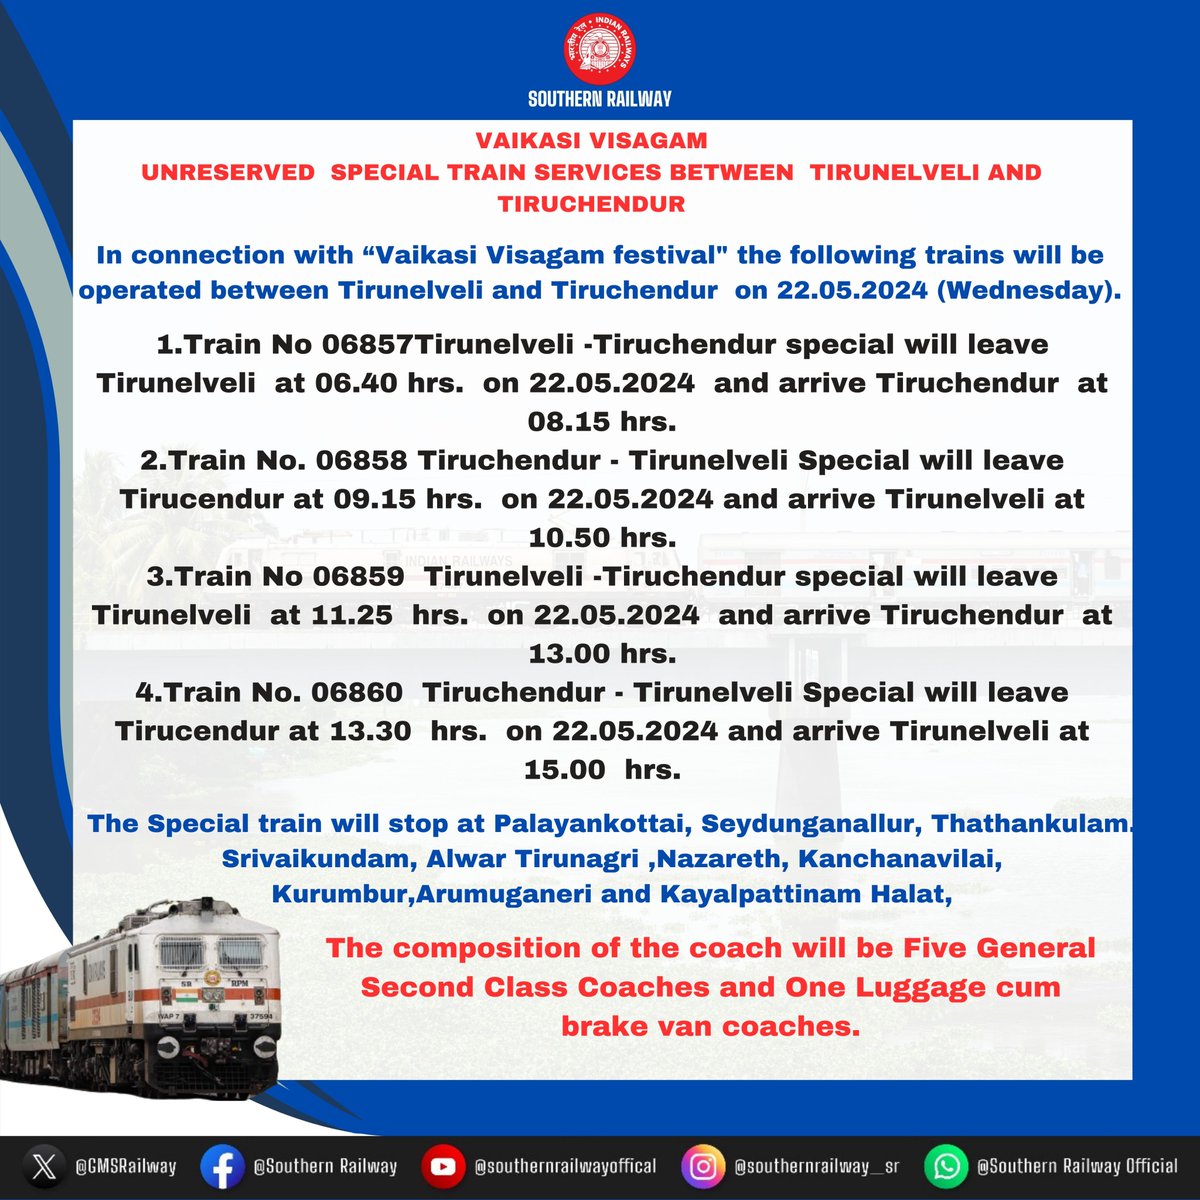 VIKASI VISAGAM UNRESERVED  SPECIAL TRAIN SERVICES BETWEEN TIRUNELVELI AND TIRUCHENDUR

Passengers, Kindly take note and plan your trip accordingly 

#SouthernRailway #Train #railwayupdates